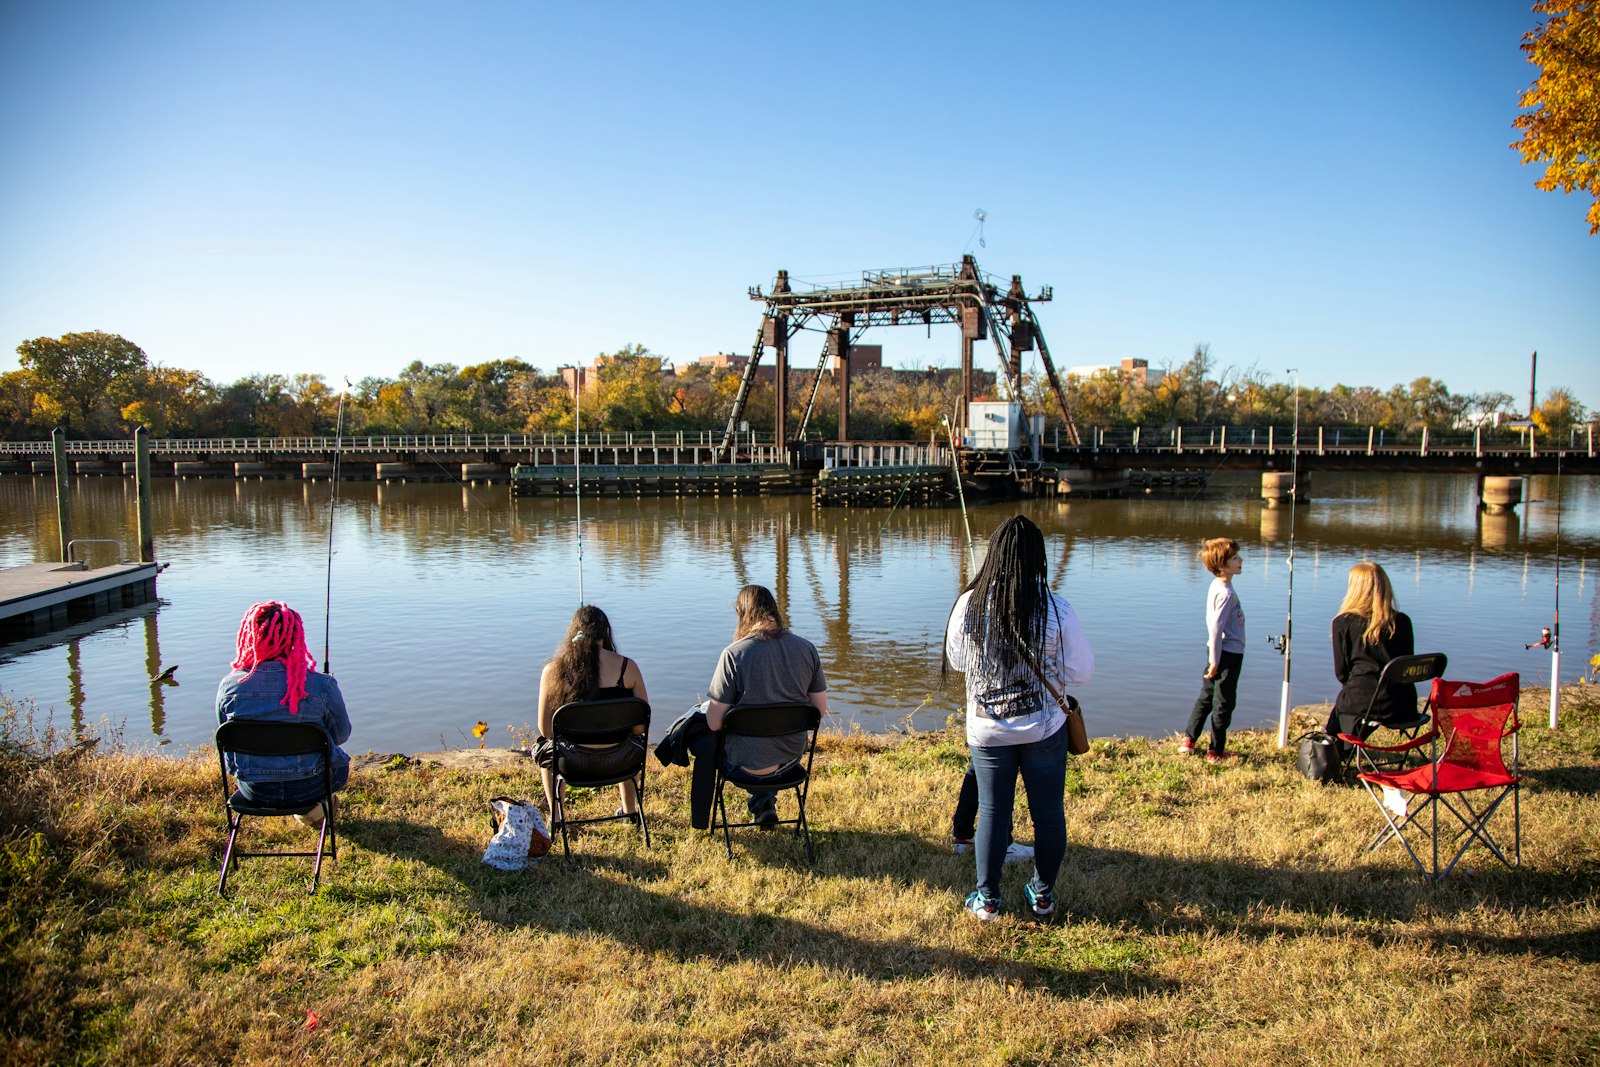 Six young people sit in chairs as they fish along the bank of the Anacostia River